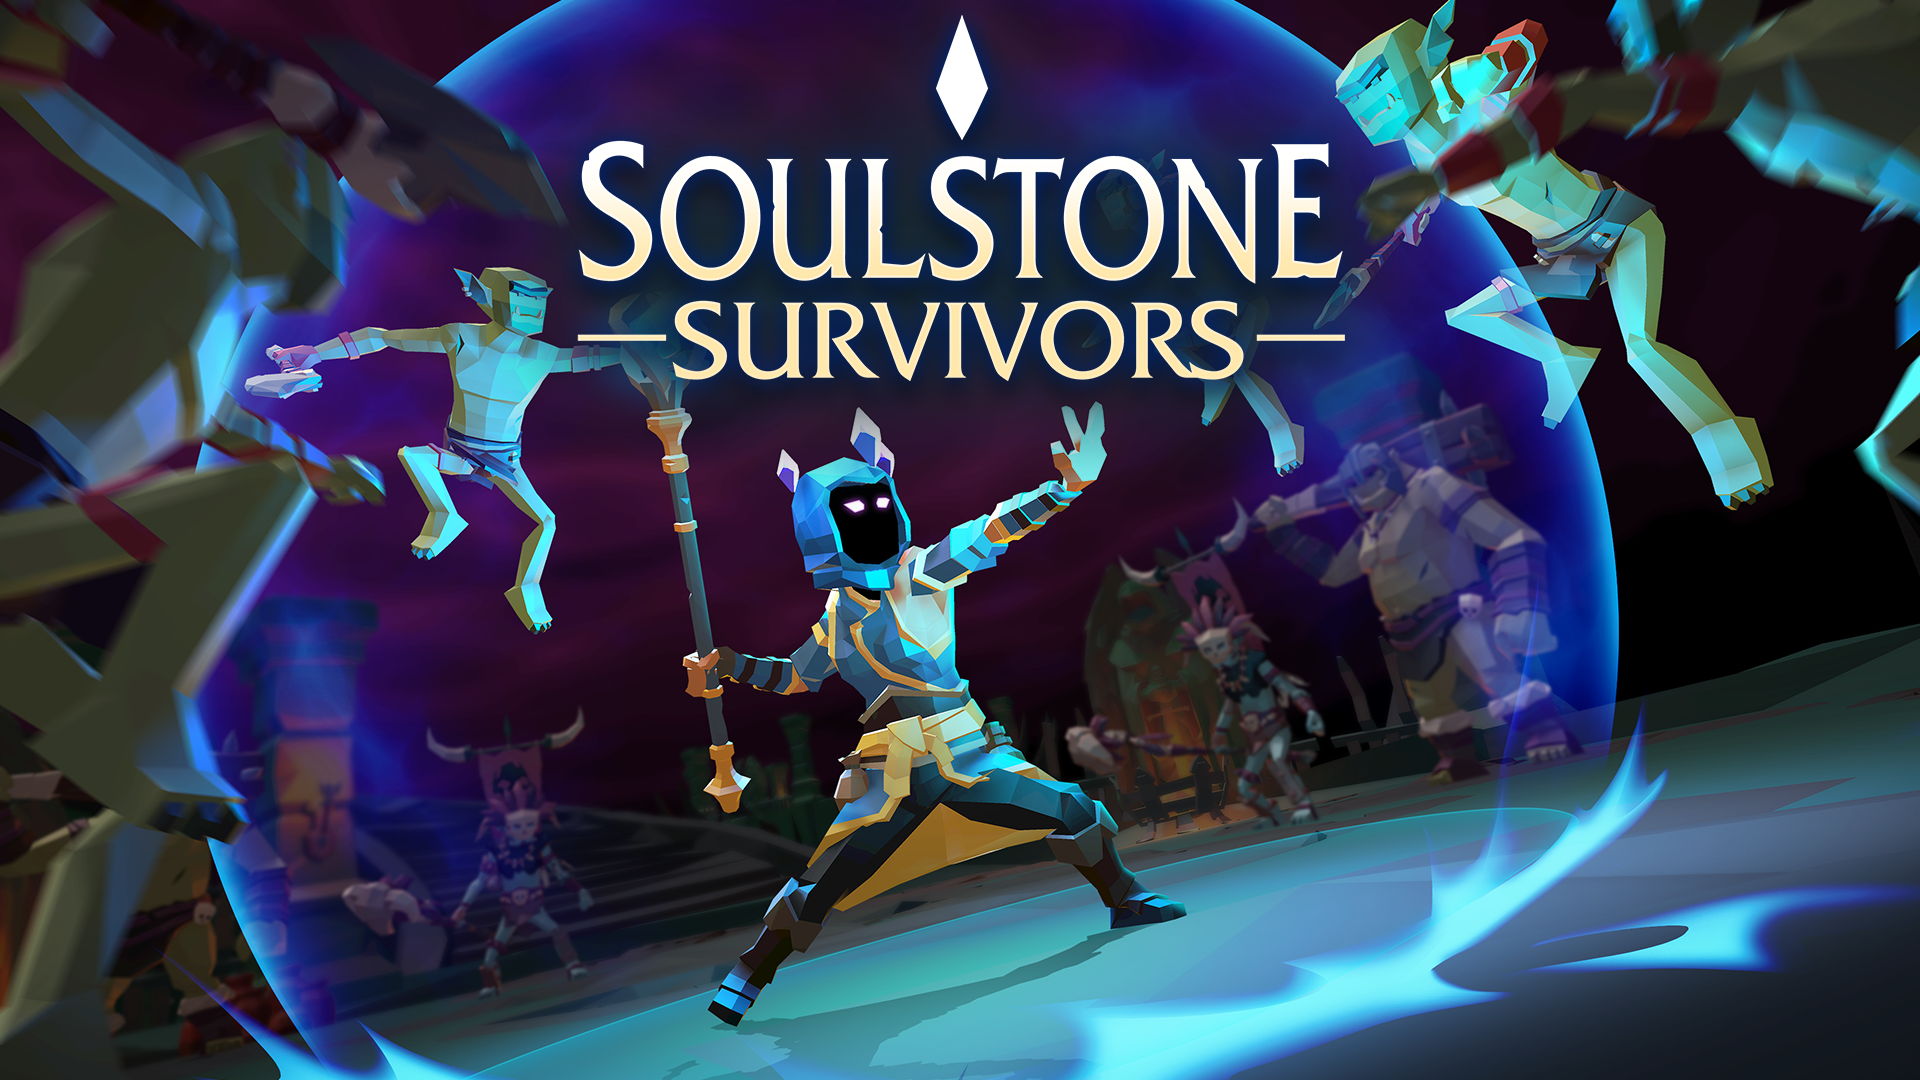 The Void Beckons. Soulstone Survivors Launches Into Early Access on November 7th